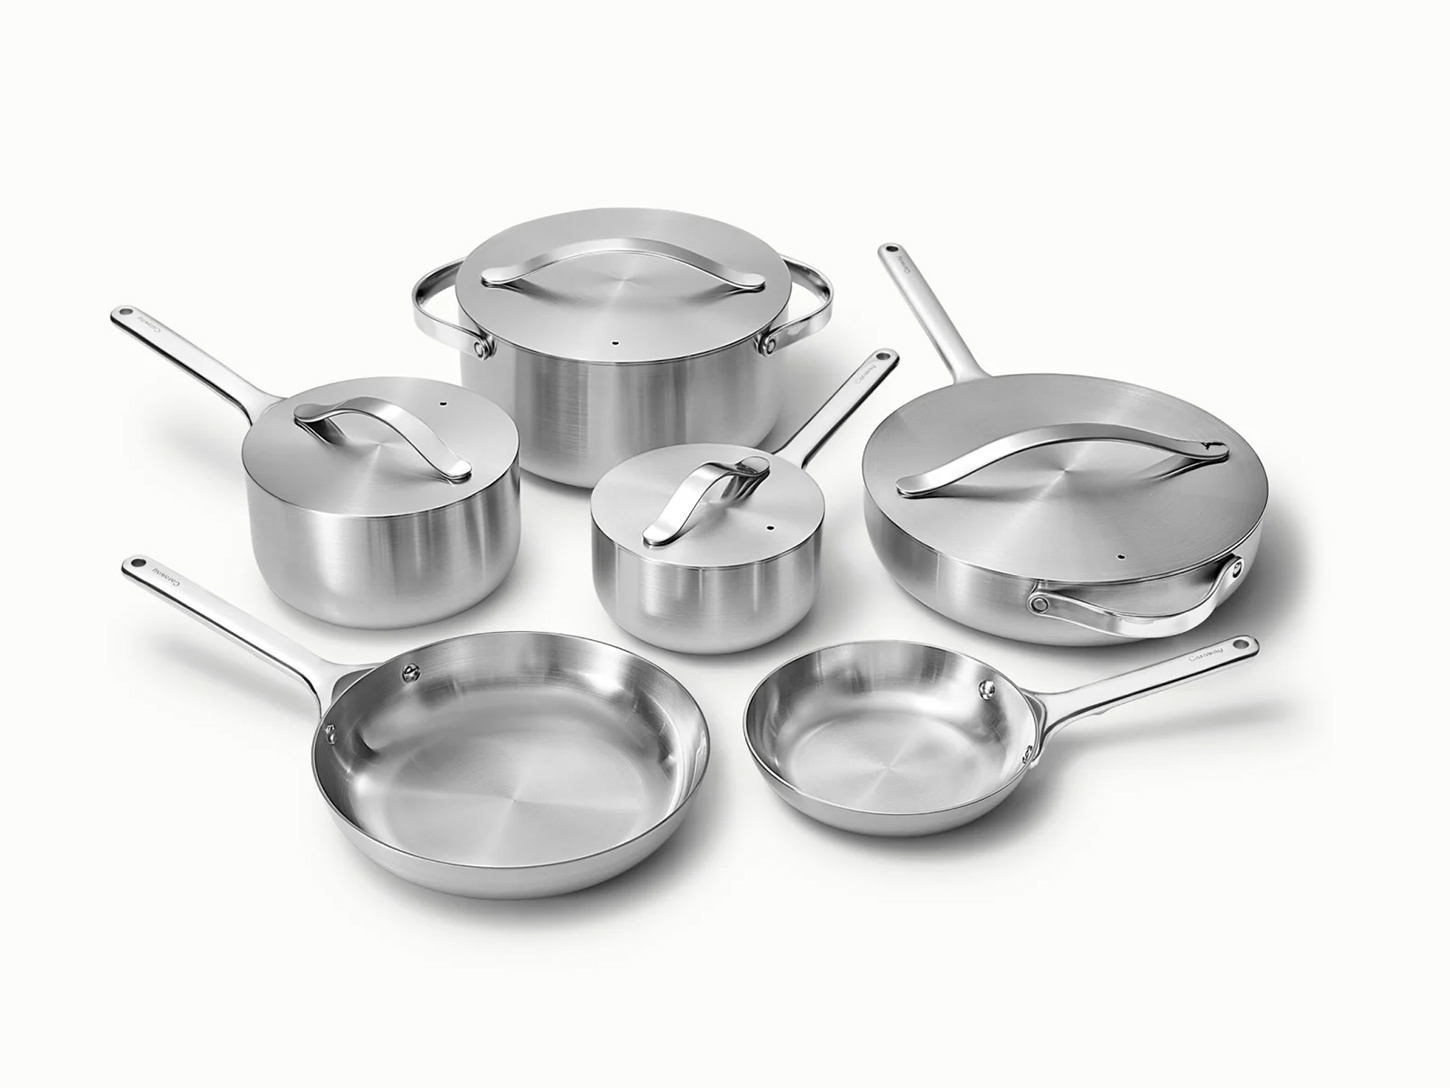 Is Stainless Steel Cookware Safe to Cook With?